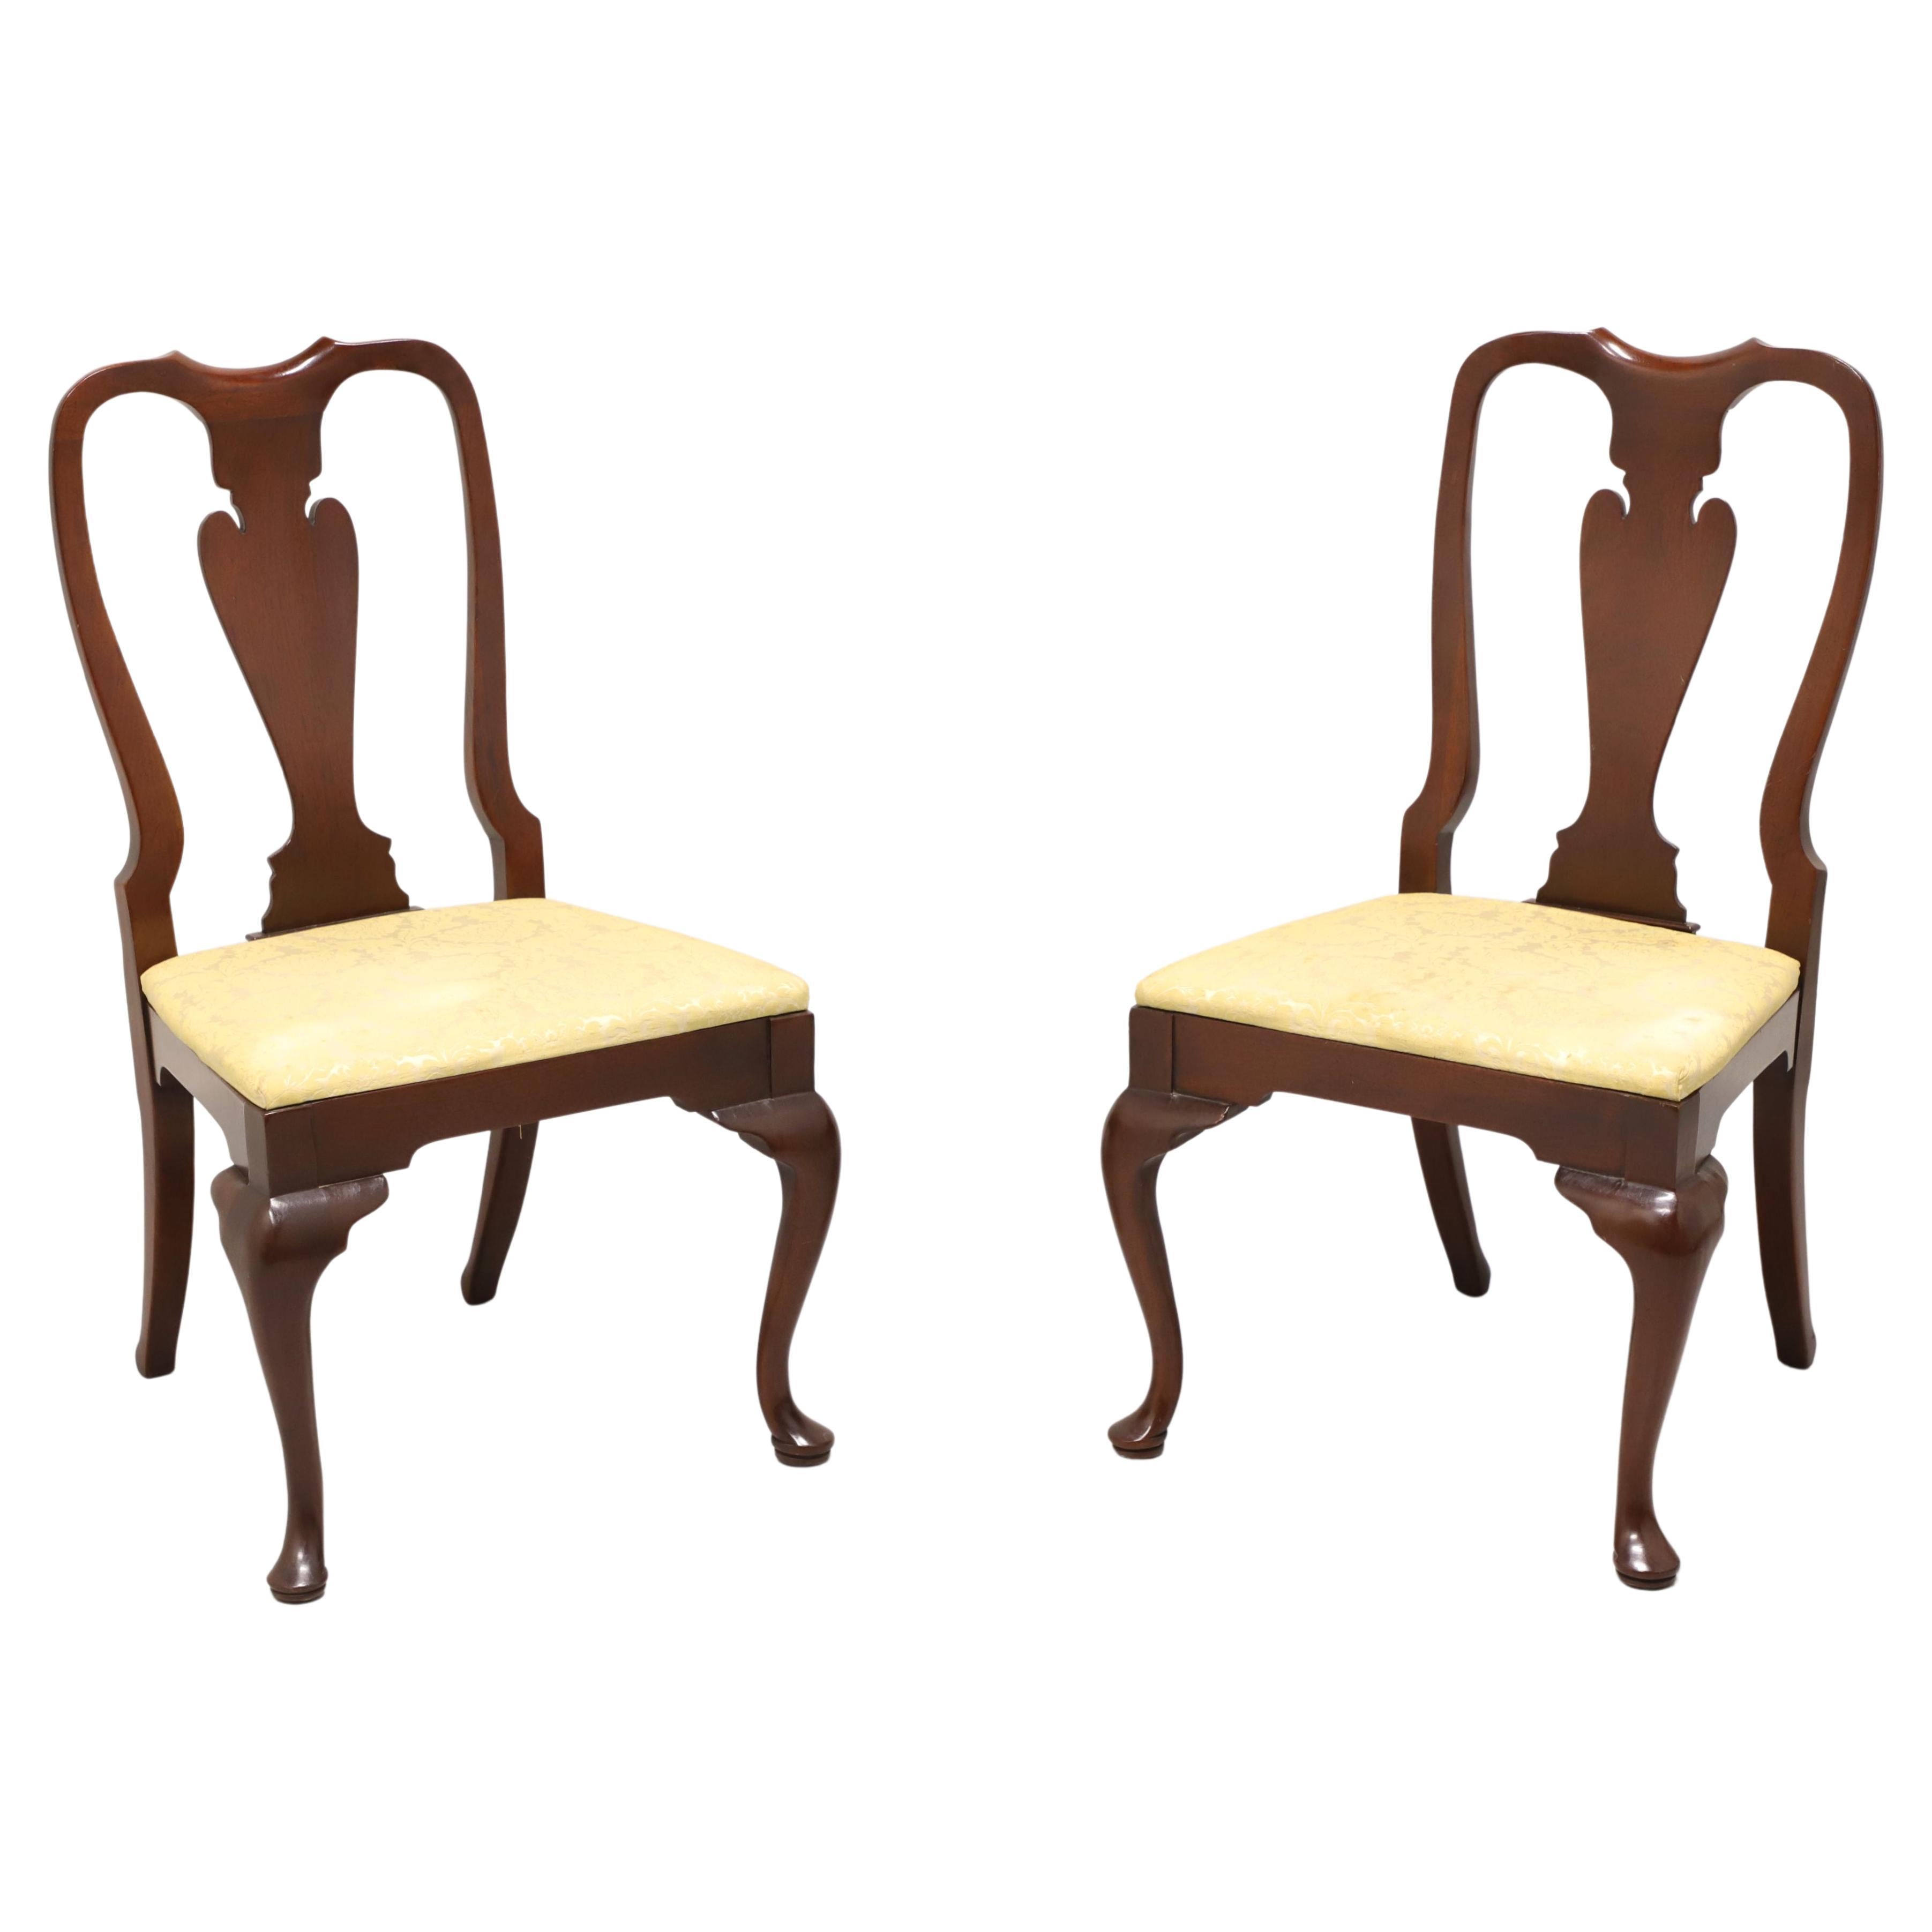 HICKORY CHAIR Mahogany Queen Anne Dining Side Chairs - Pair A